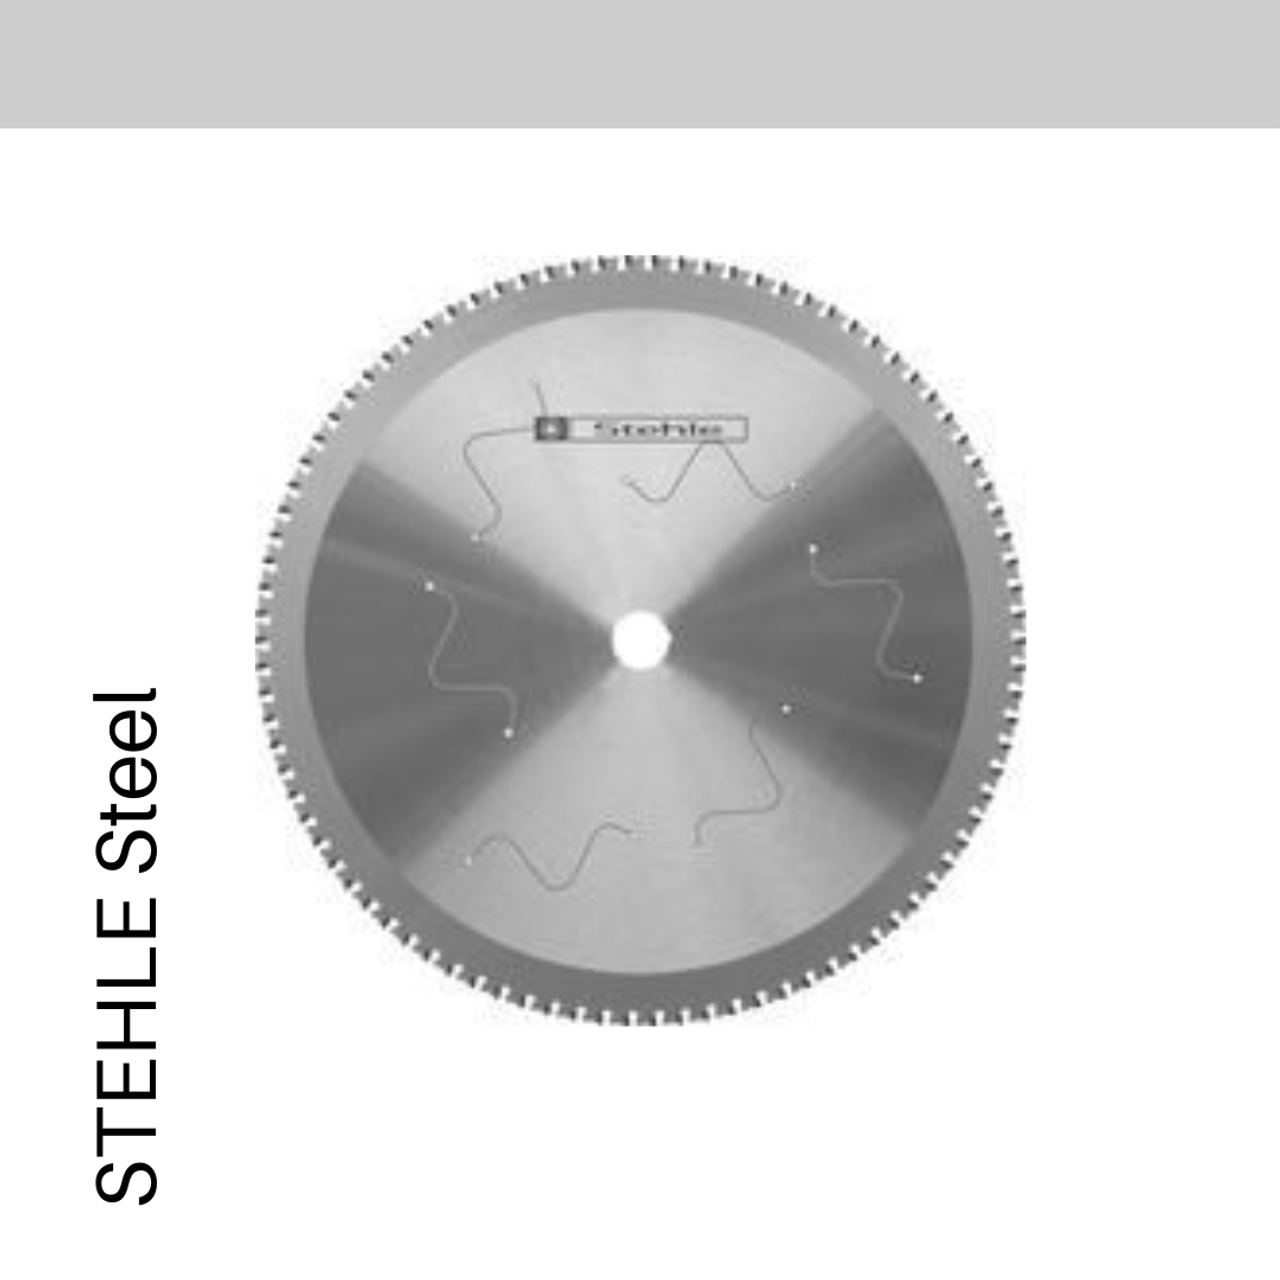 STEHLE HKS Unisteel Saw Blade for Steel with Steel for the Fabrication Industry and Operators in Victoria and New South Wales.